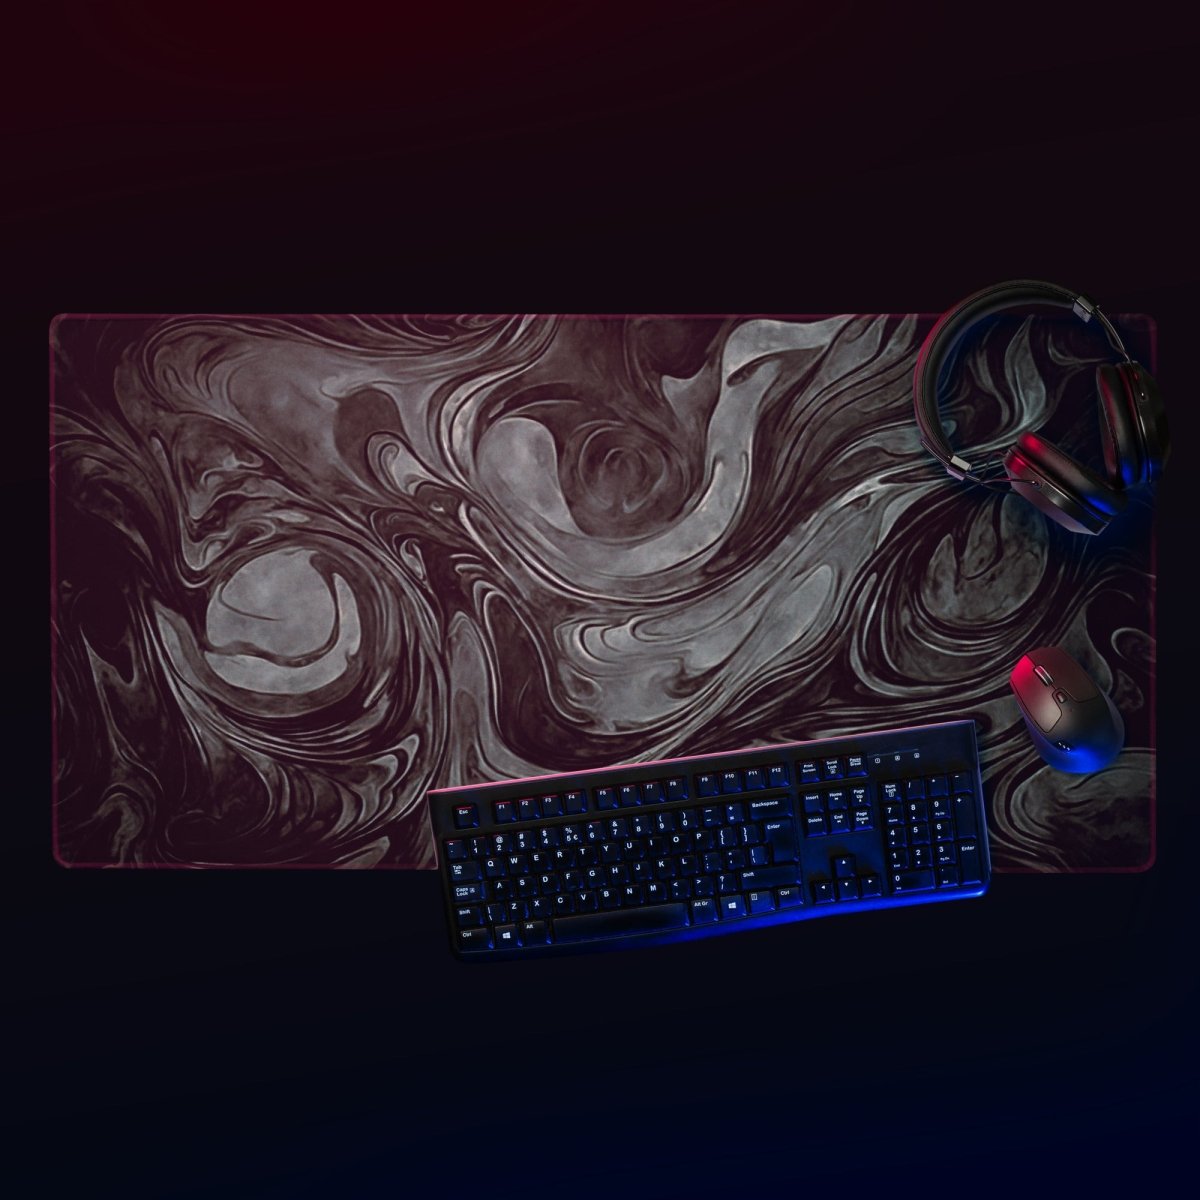 Deep darkness - Gaming mouse pad - Ever colorful